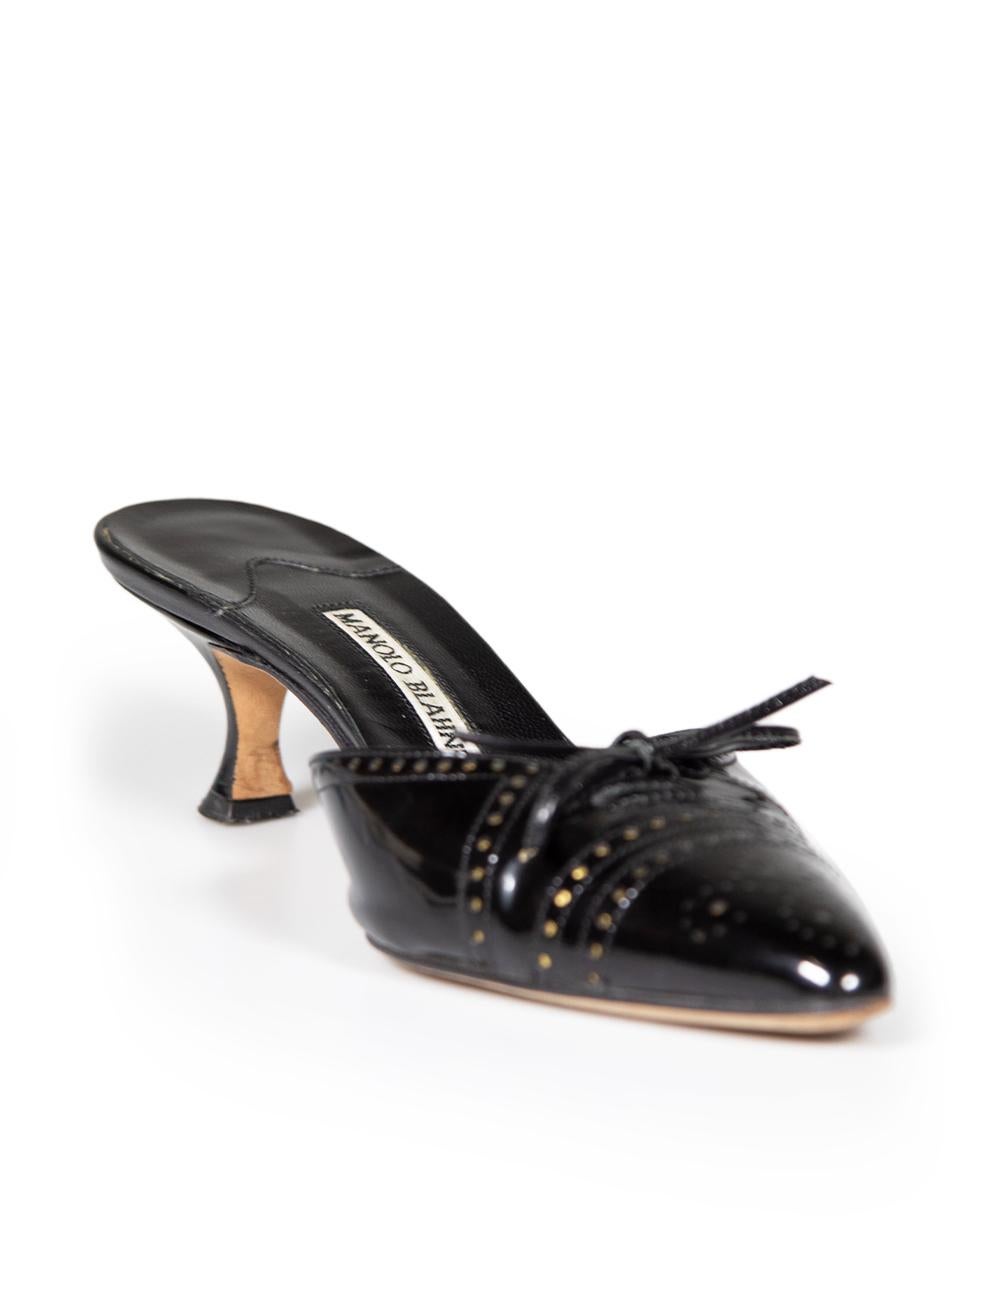 CONDITION is Very good. Minimal wear to mules is evident. Minimal abrasions to left side of left shoe and right side of right shoe on this used Manolo Blahnik designer resale item. This item comes with original dust bag.
 
 
 
 Details
 
 
 Black
 
